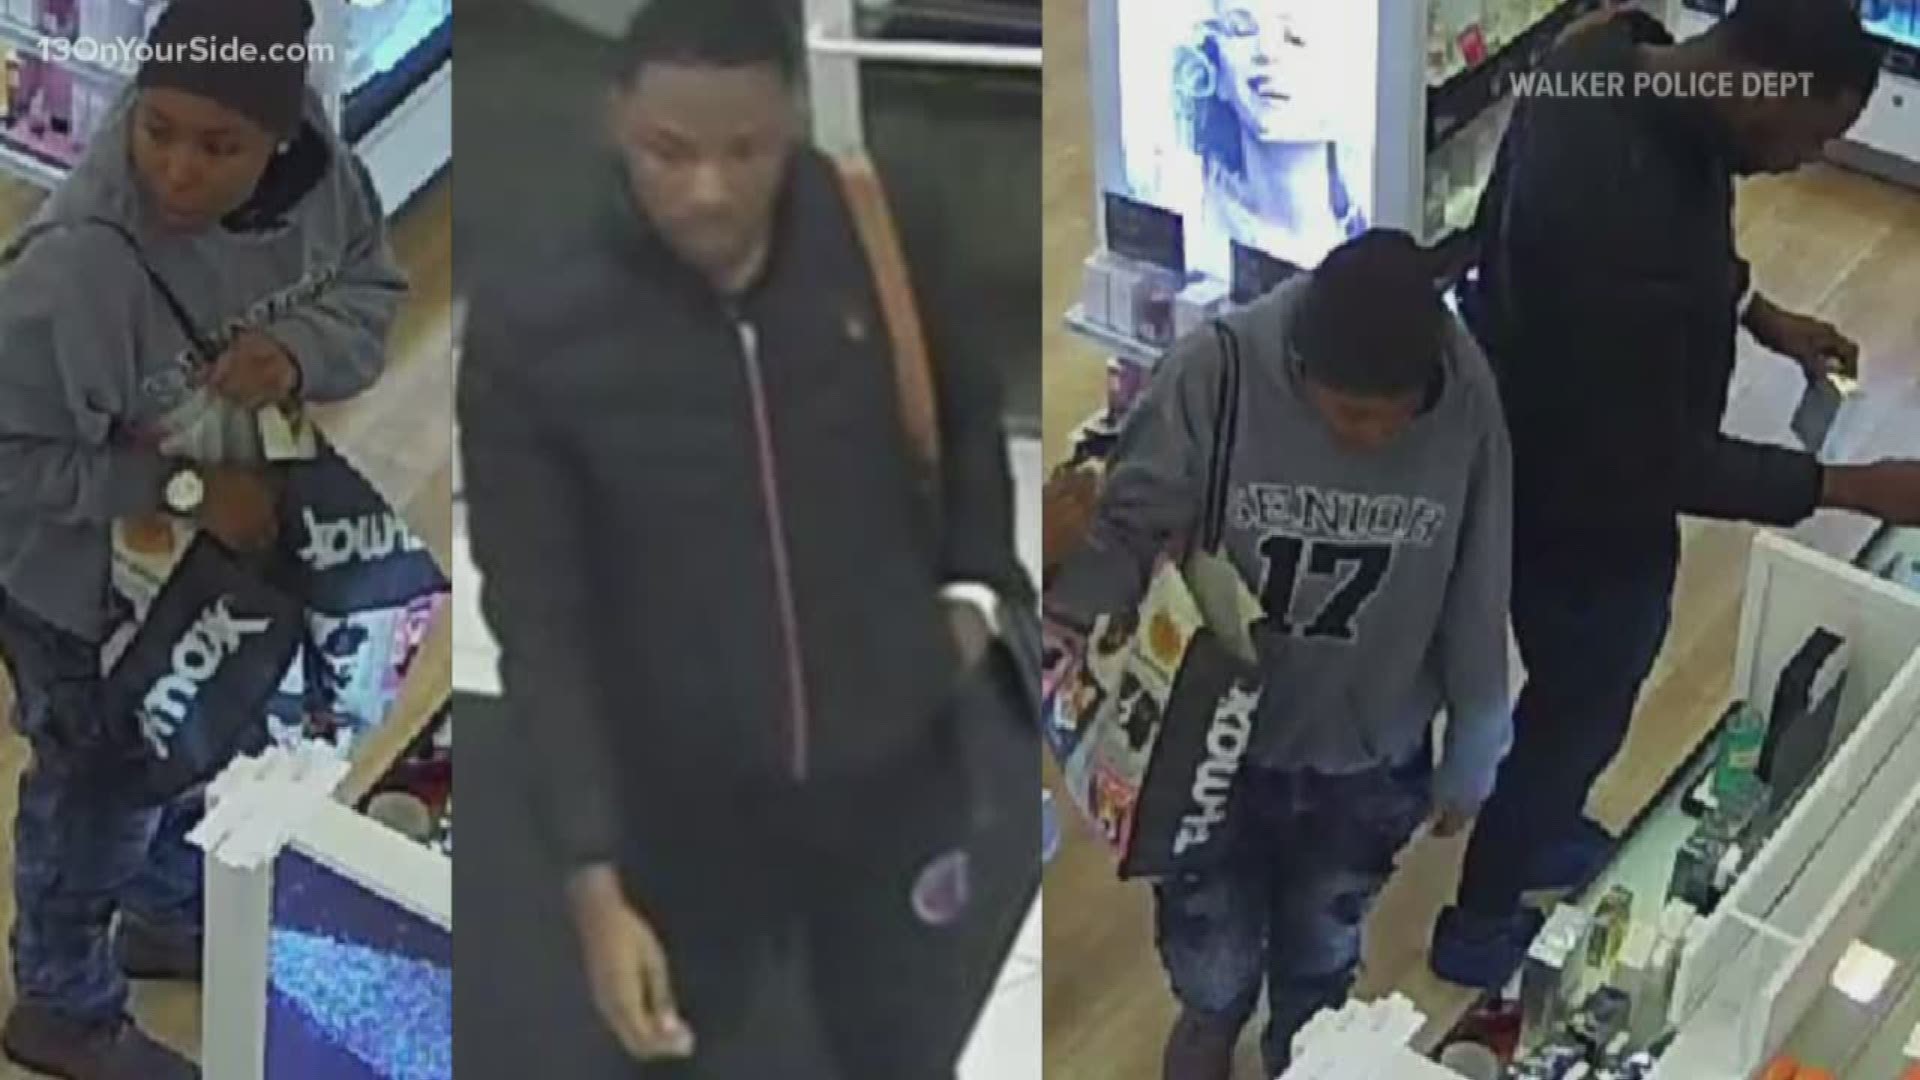 The suspects stole from several Ulta Beauty stores throughout Kent and Ottawa counties.